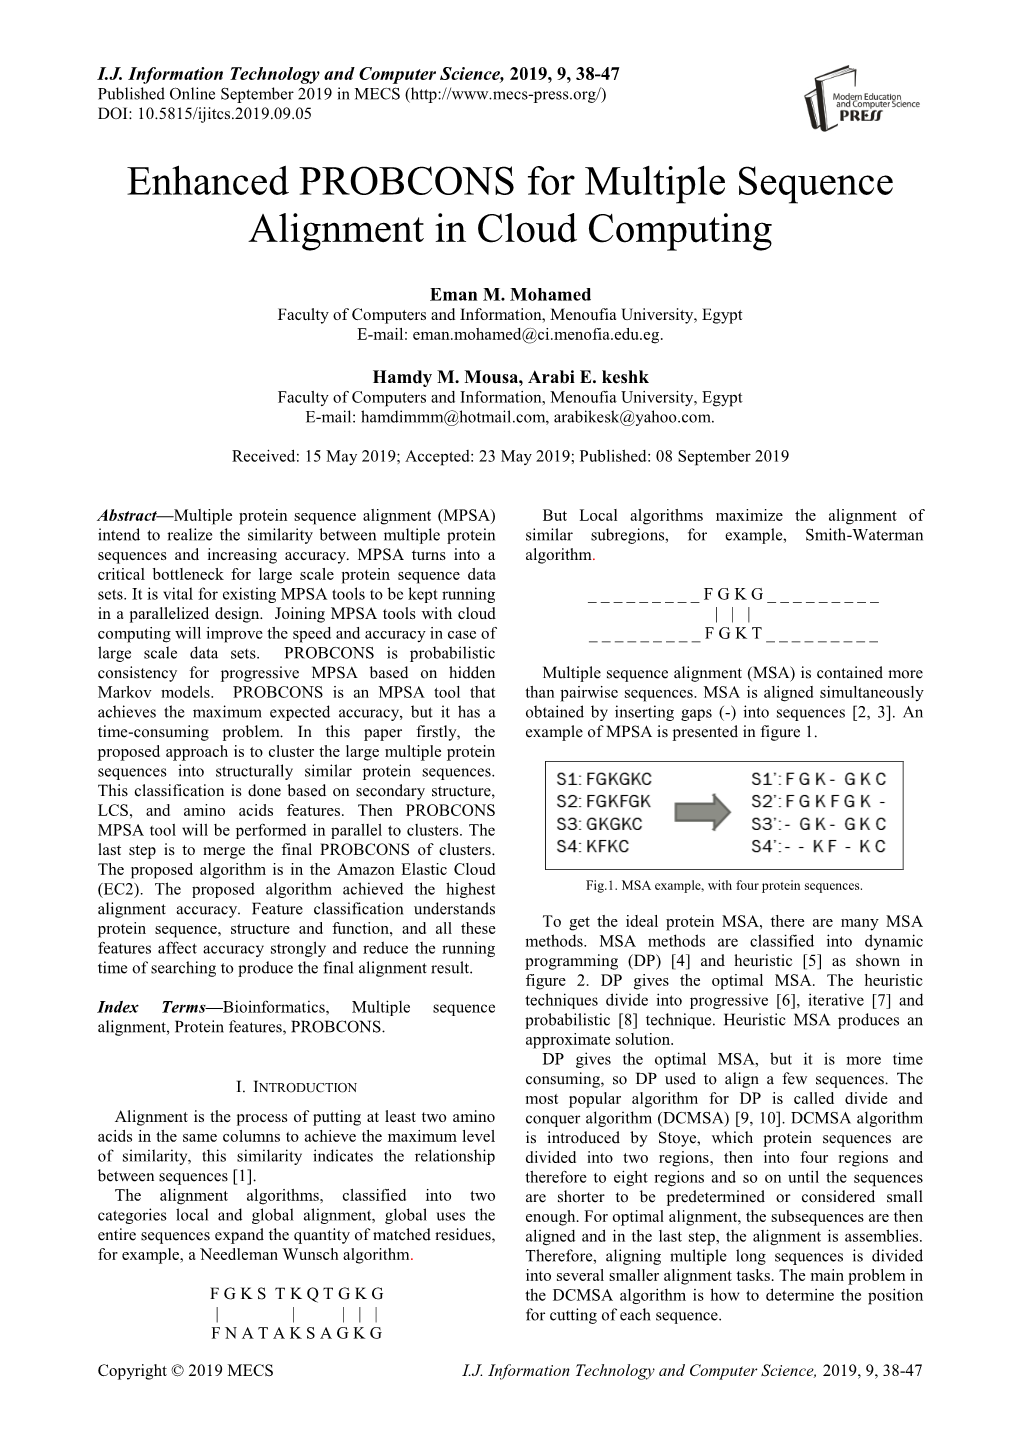 Enhanced PROBCONS for Multiple Sequence Alignment in Cloud Computing